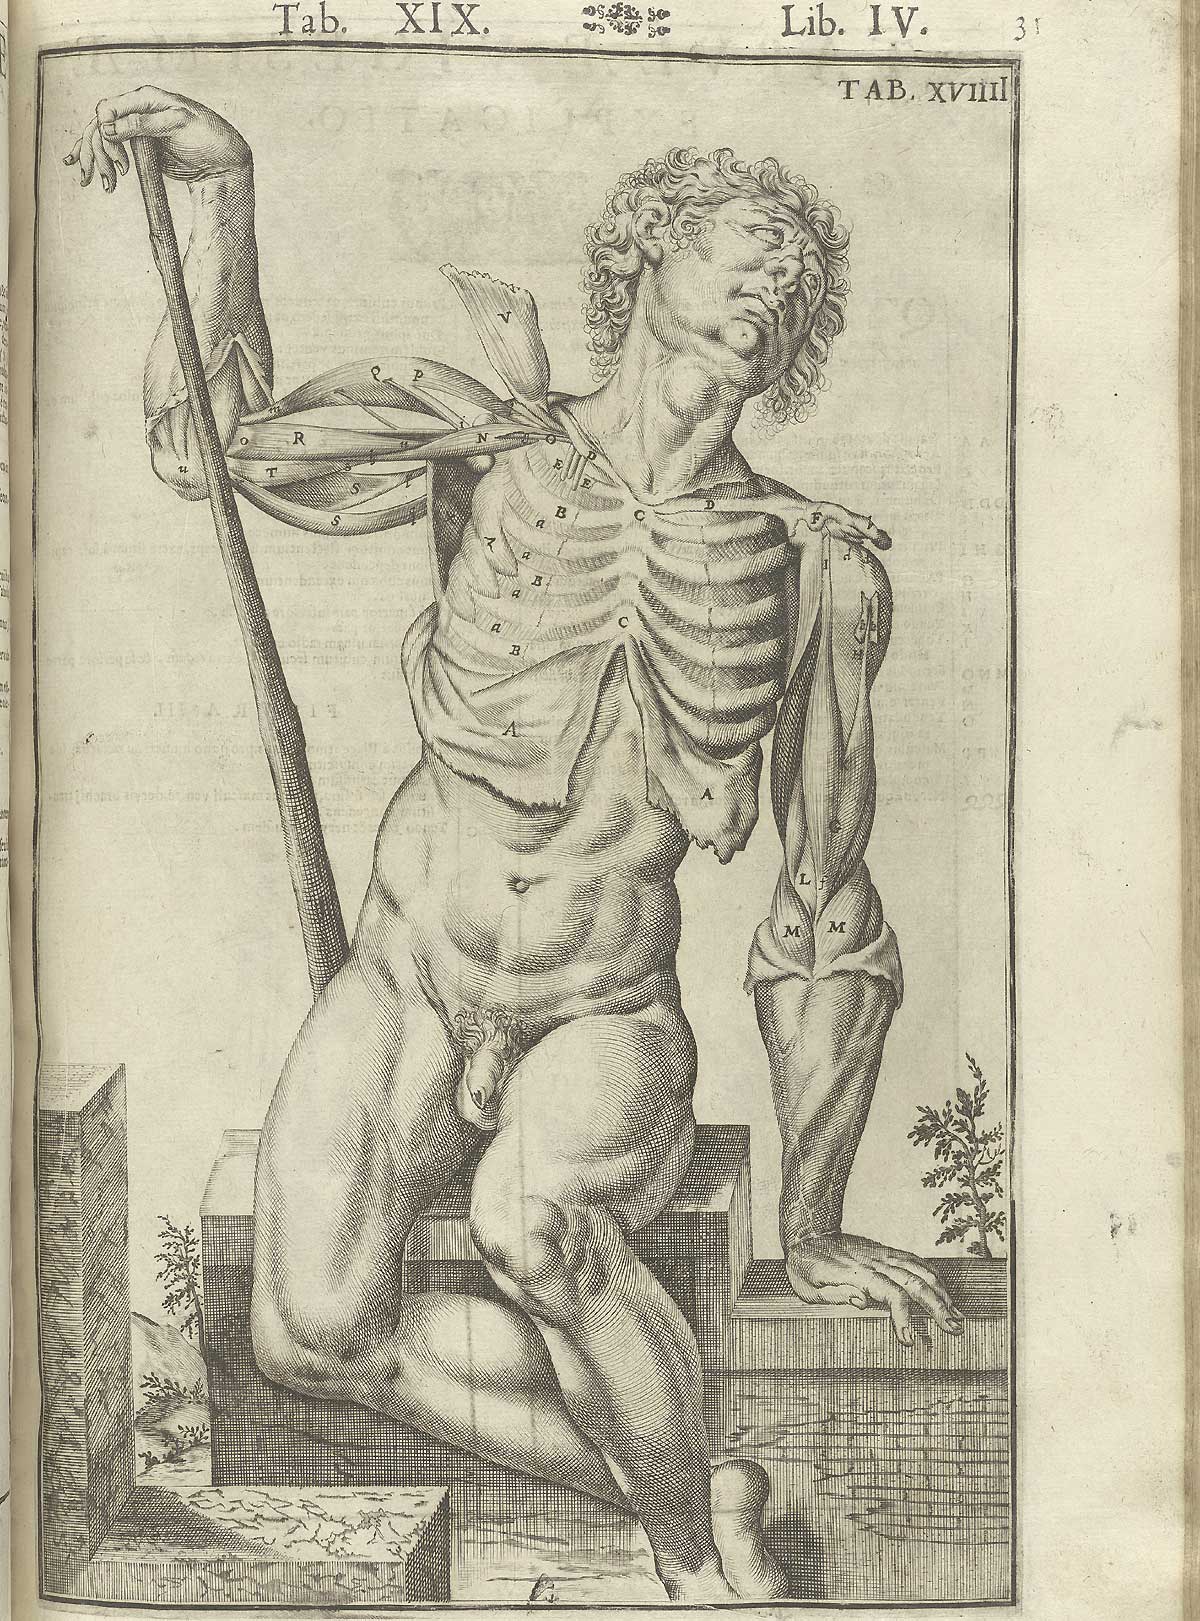 Engraving showing a facing nude male anatomical figure in a pastoral setting sitting on stone pediment leaning on a cane with his right arm, with his ribcage, biceps, and triceps exposed in detail, with the rest of his skin pulled away from his torso revealing other musculature; from Adriaan van de Spiegel and Giulio Cassieri’s De humani corporis fabrica libri decem, Venice, 1627, NLM call no. WZ 250 S755dh 1627.